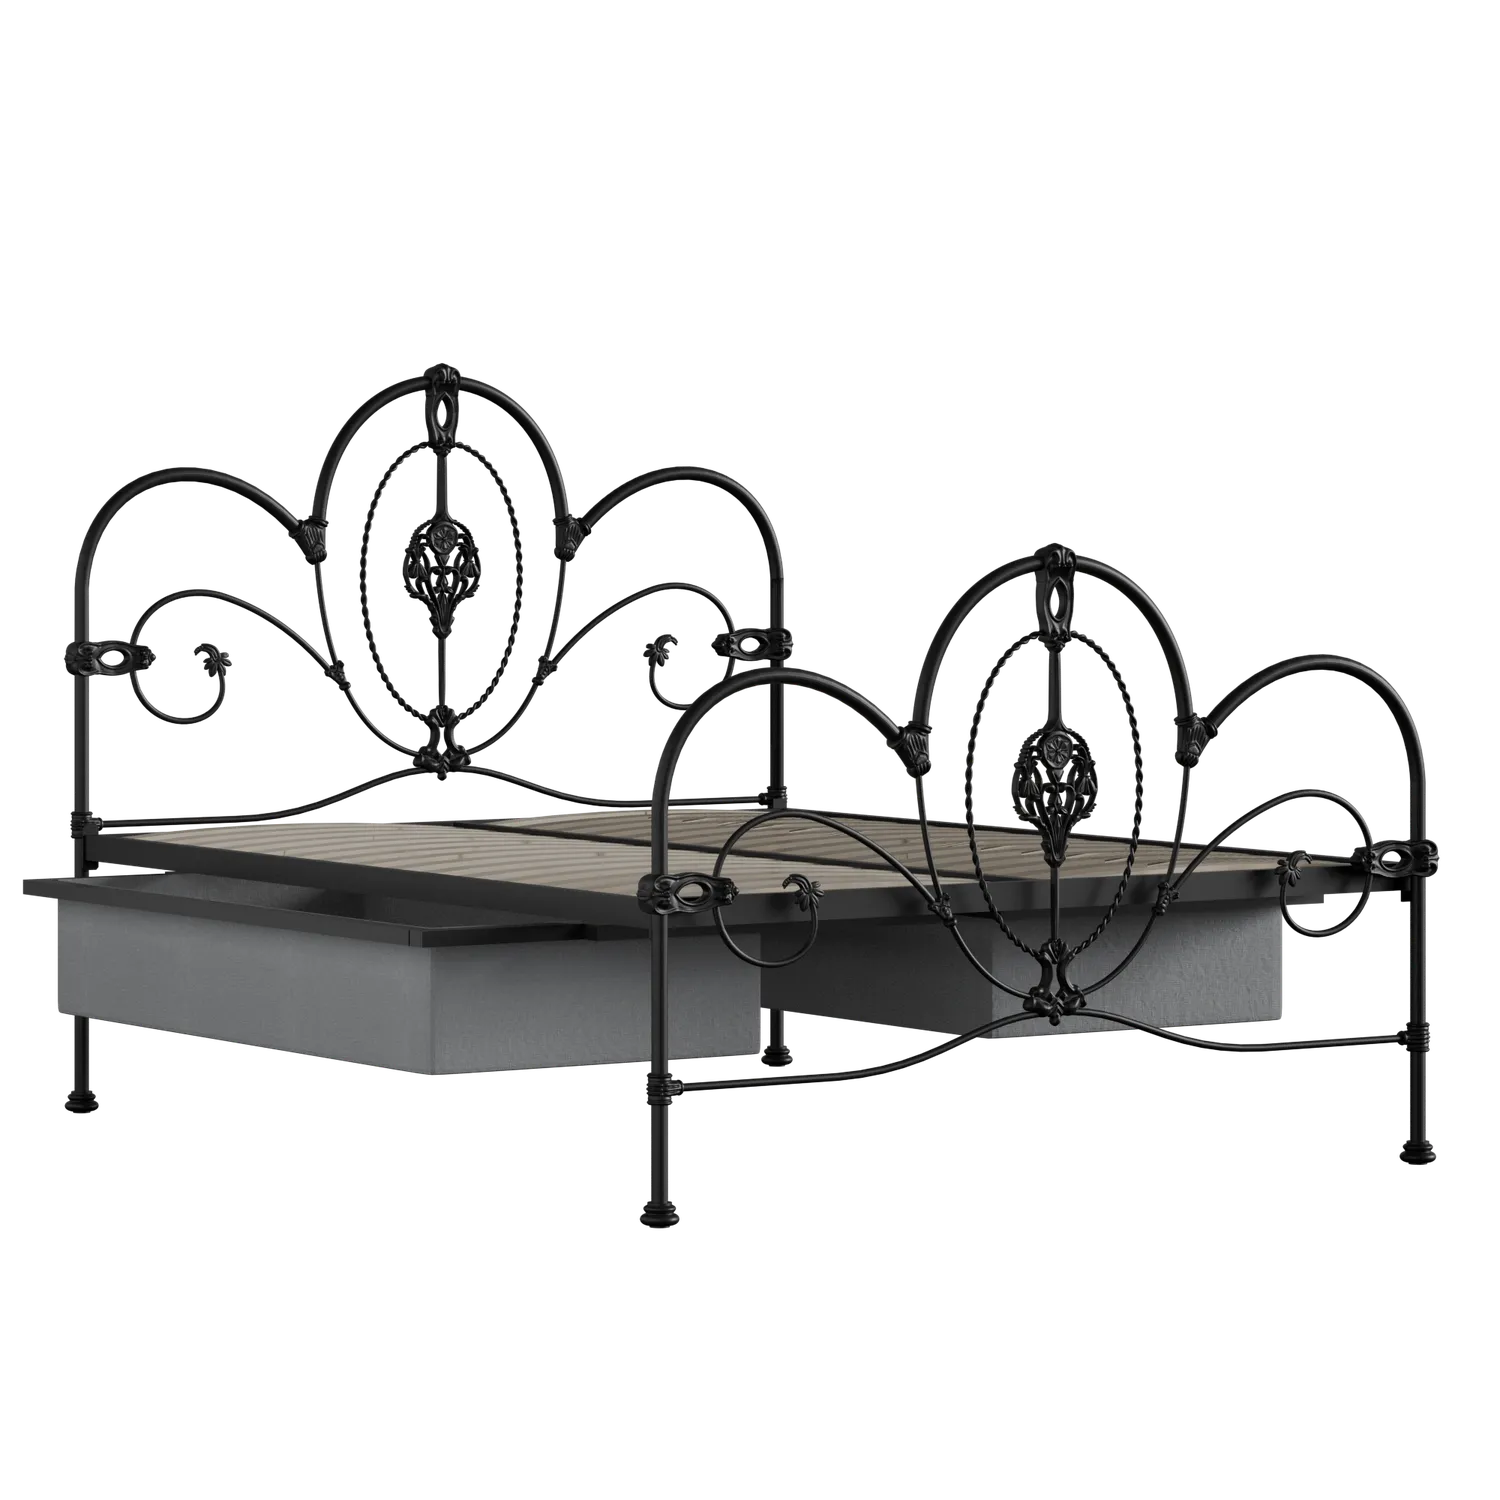 Ballina iron/metal bed in black with drawers